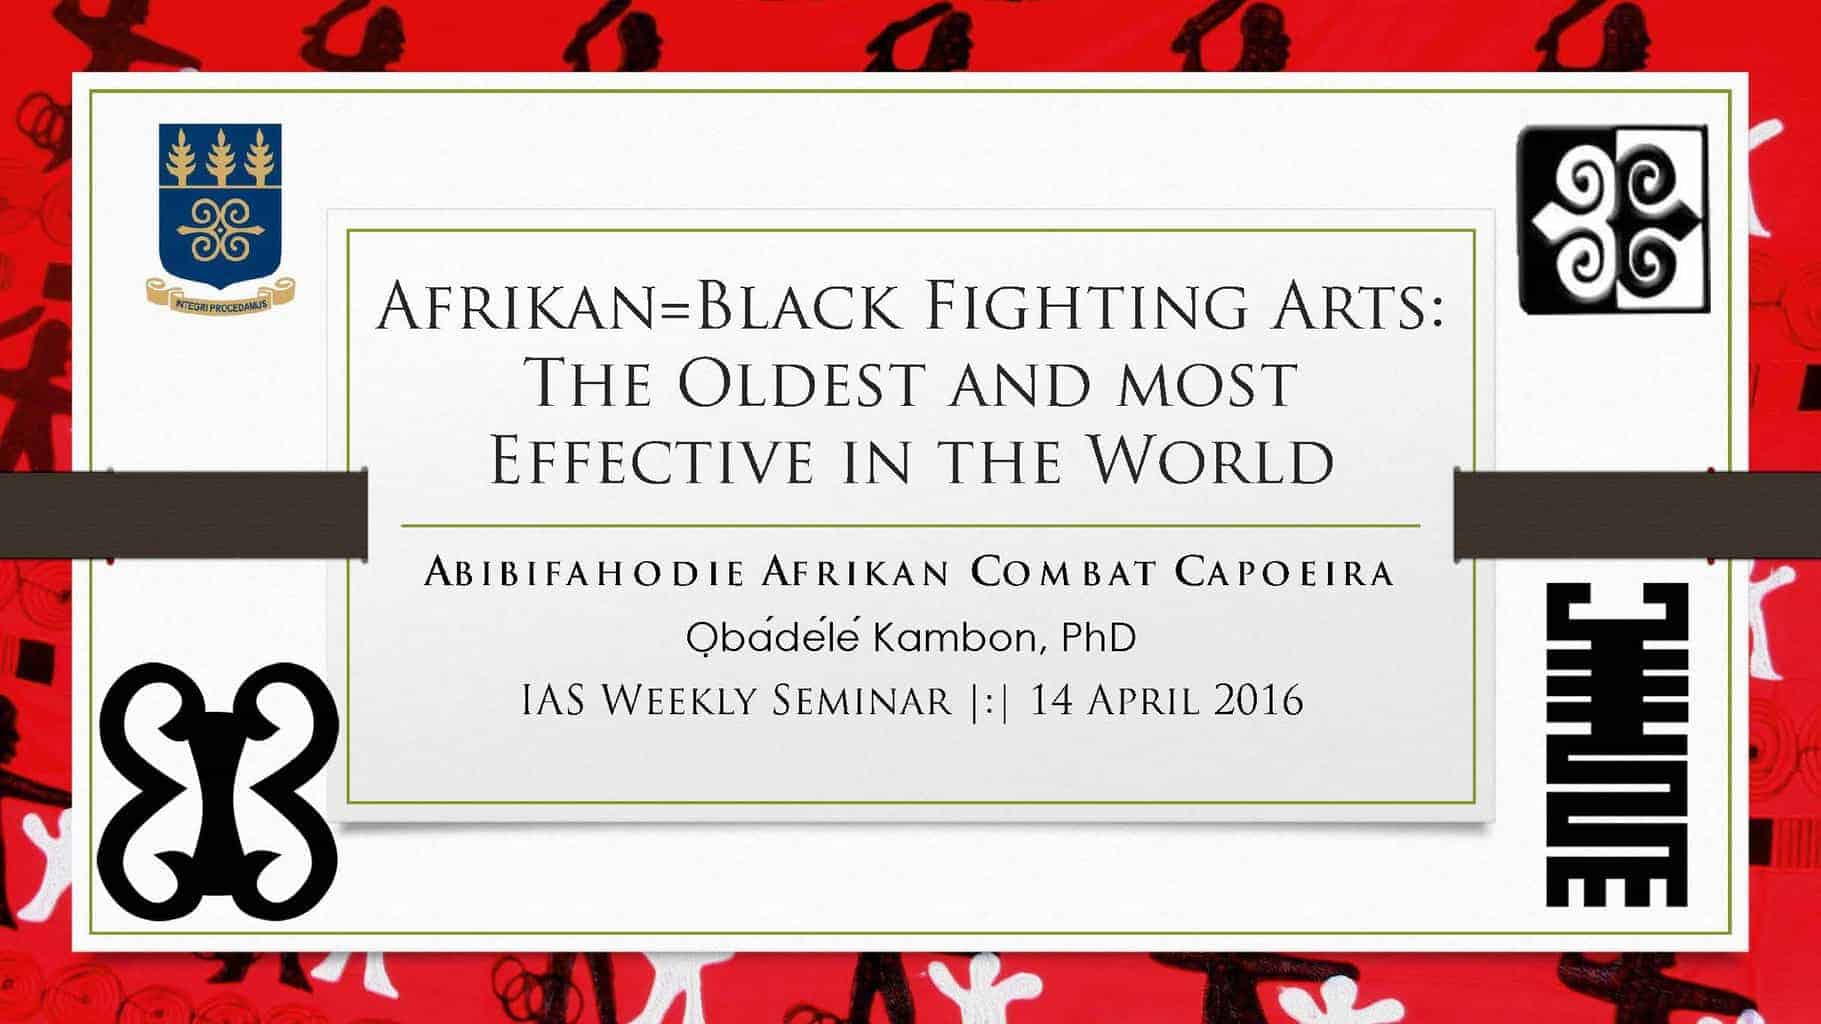 Afrikan=Black Fighting Arts: The Oldest and most Effective in the World